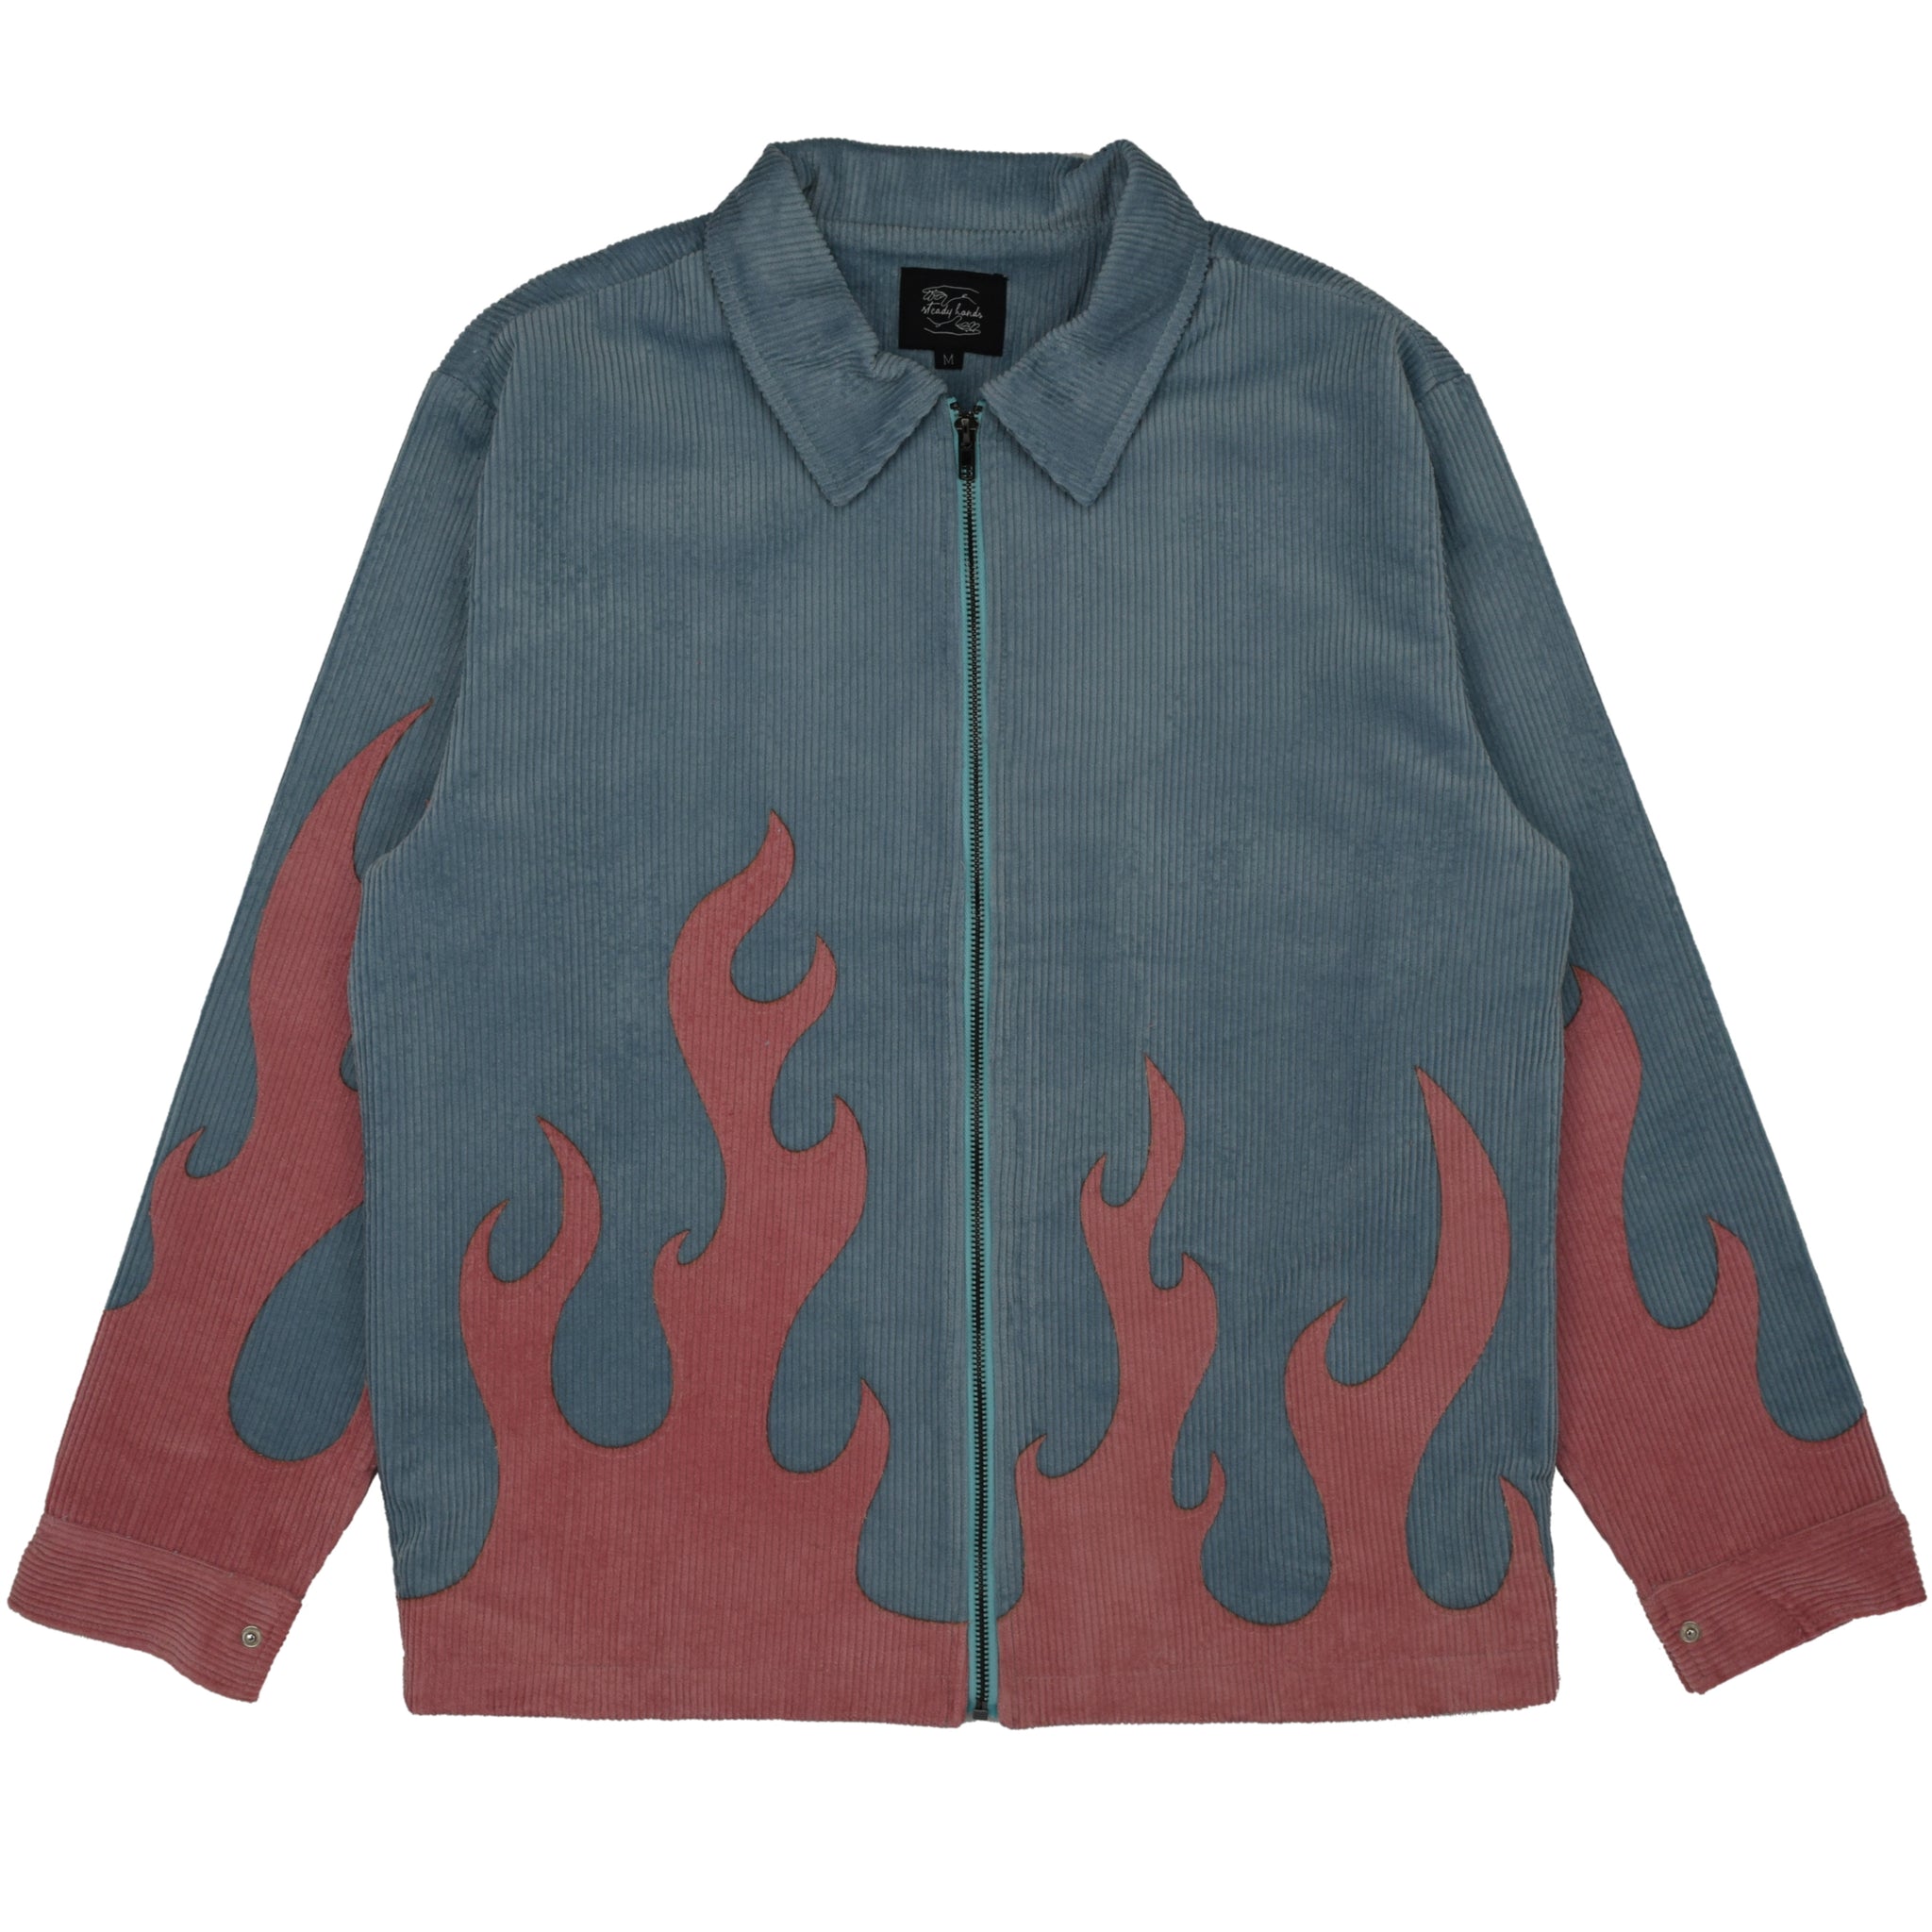 Cotton Candy Flame Jacket